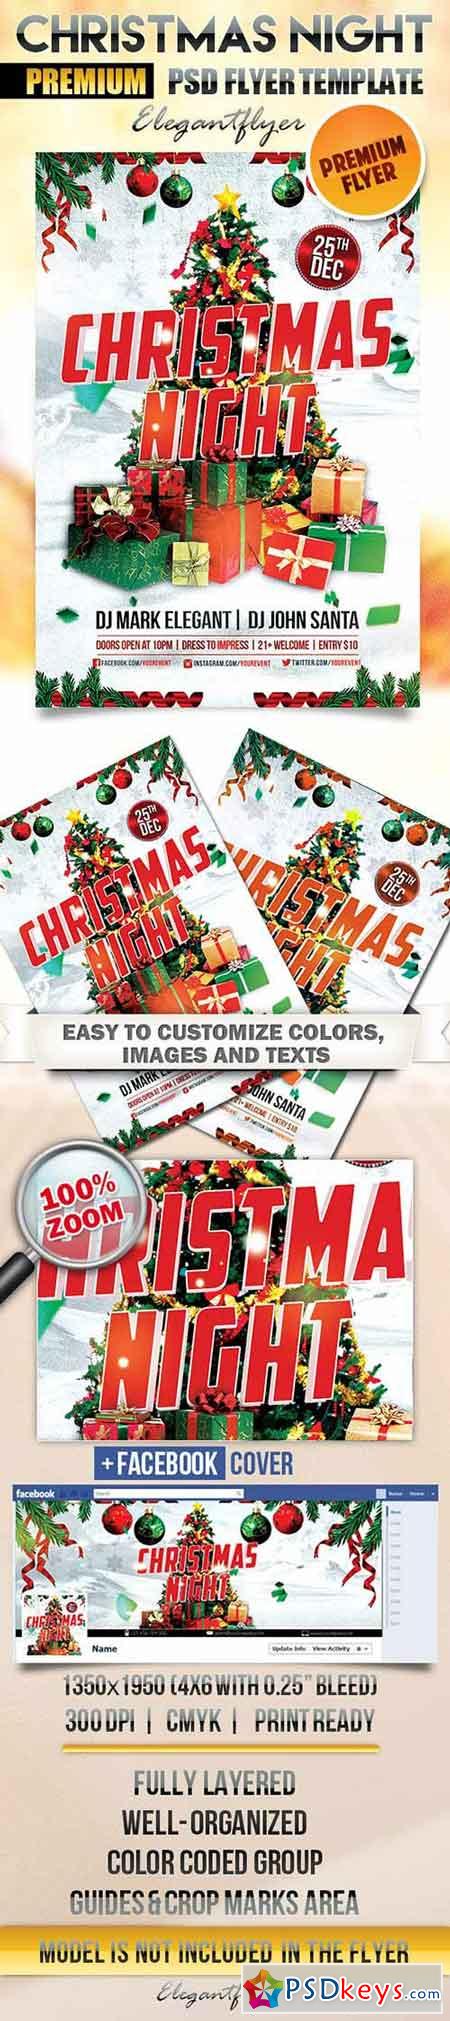 Christmas Night Flyer PSD Template + Facebook Cover